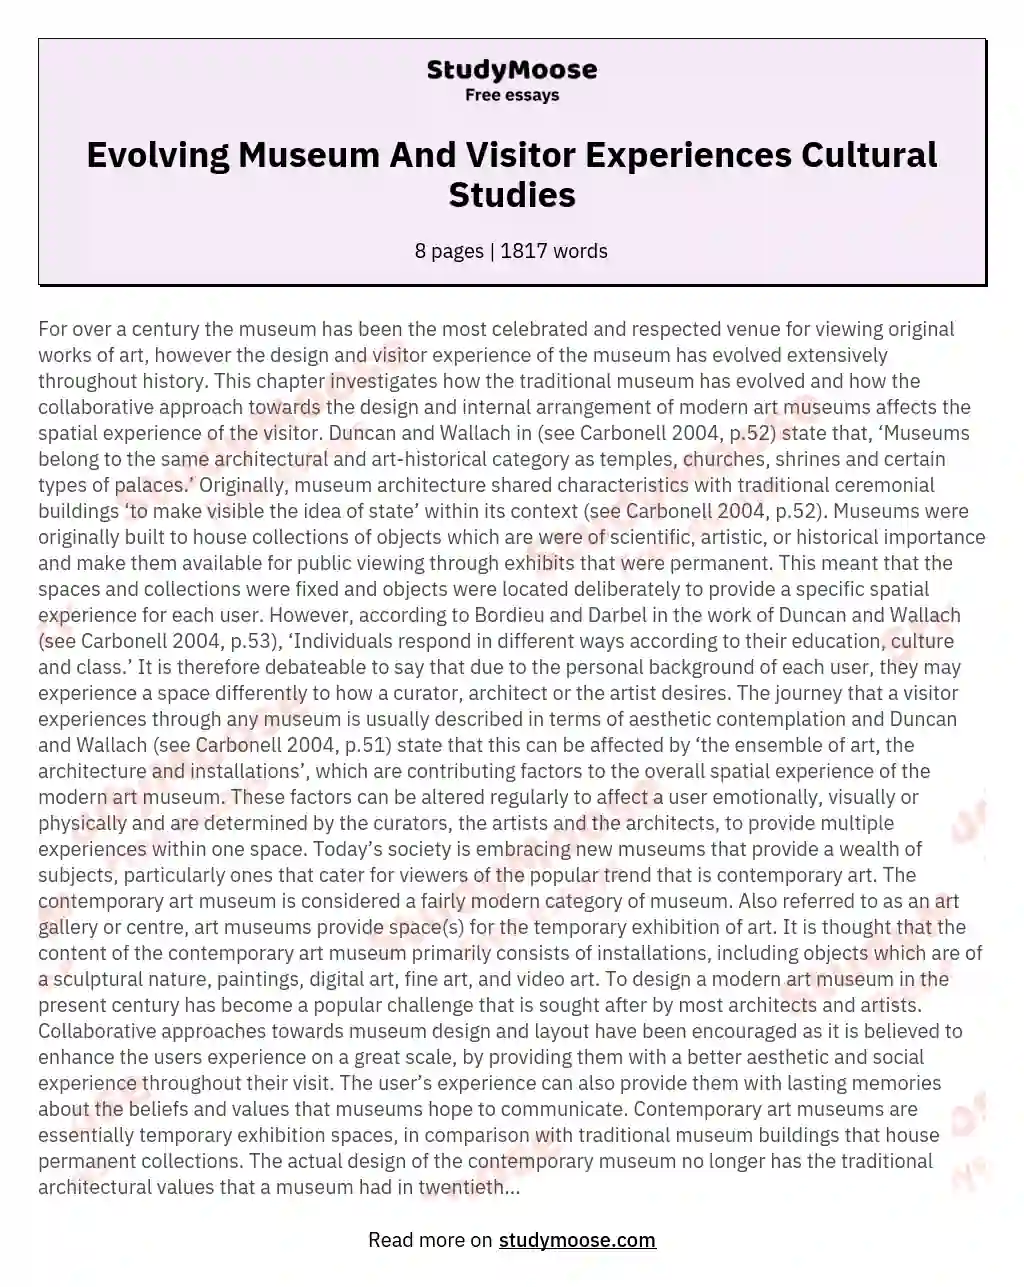 Evolving Museum And Visitor Experiences Cultural Studies essay